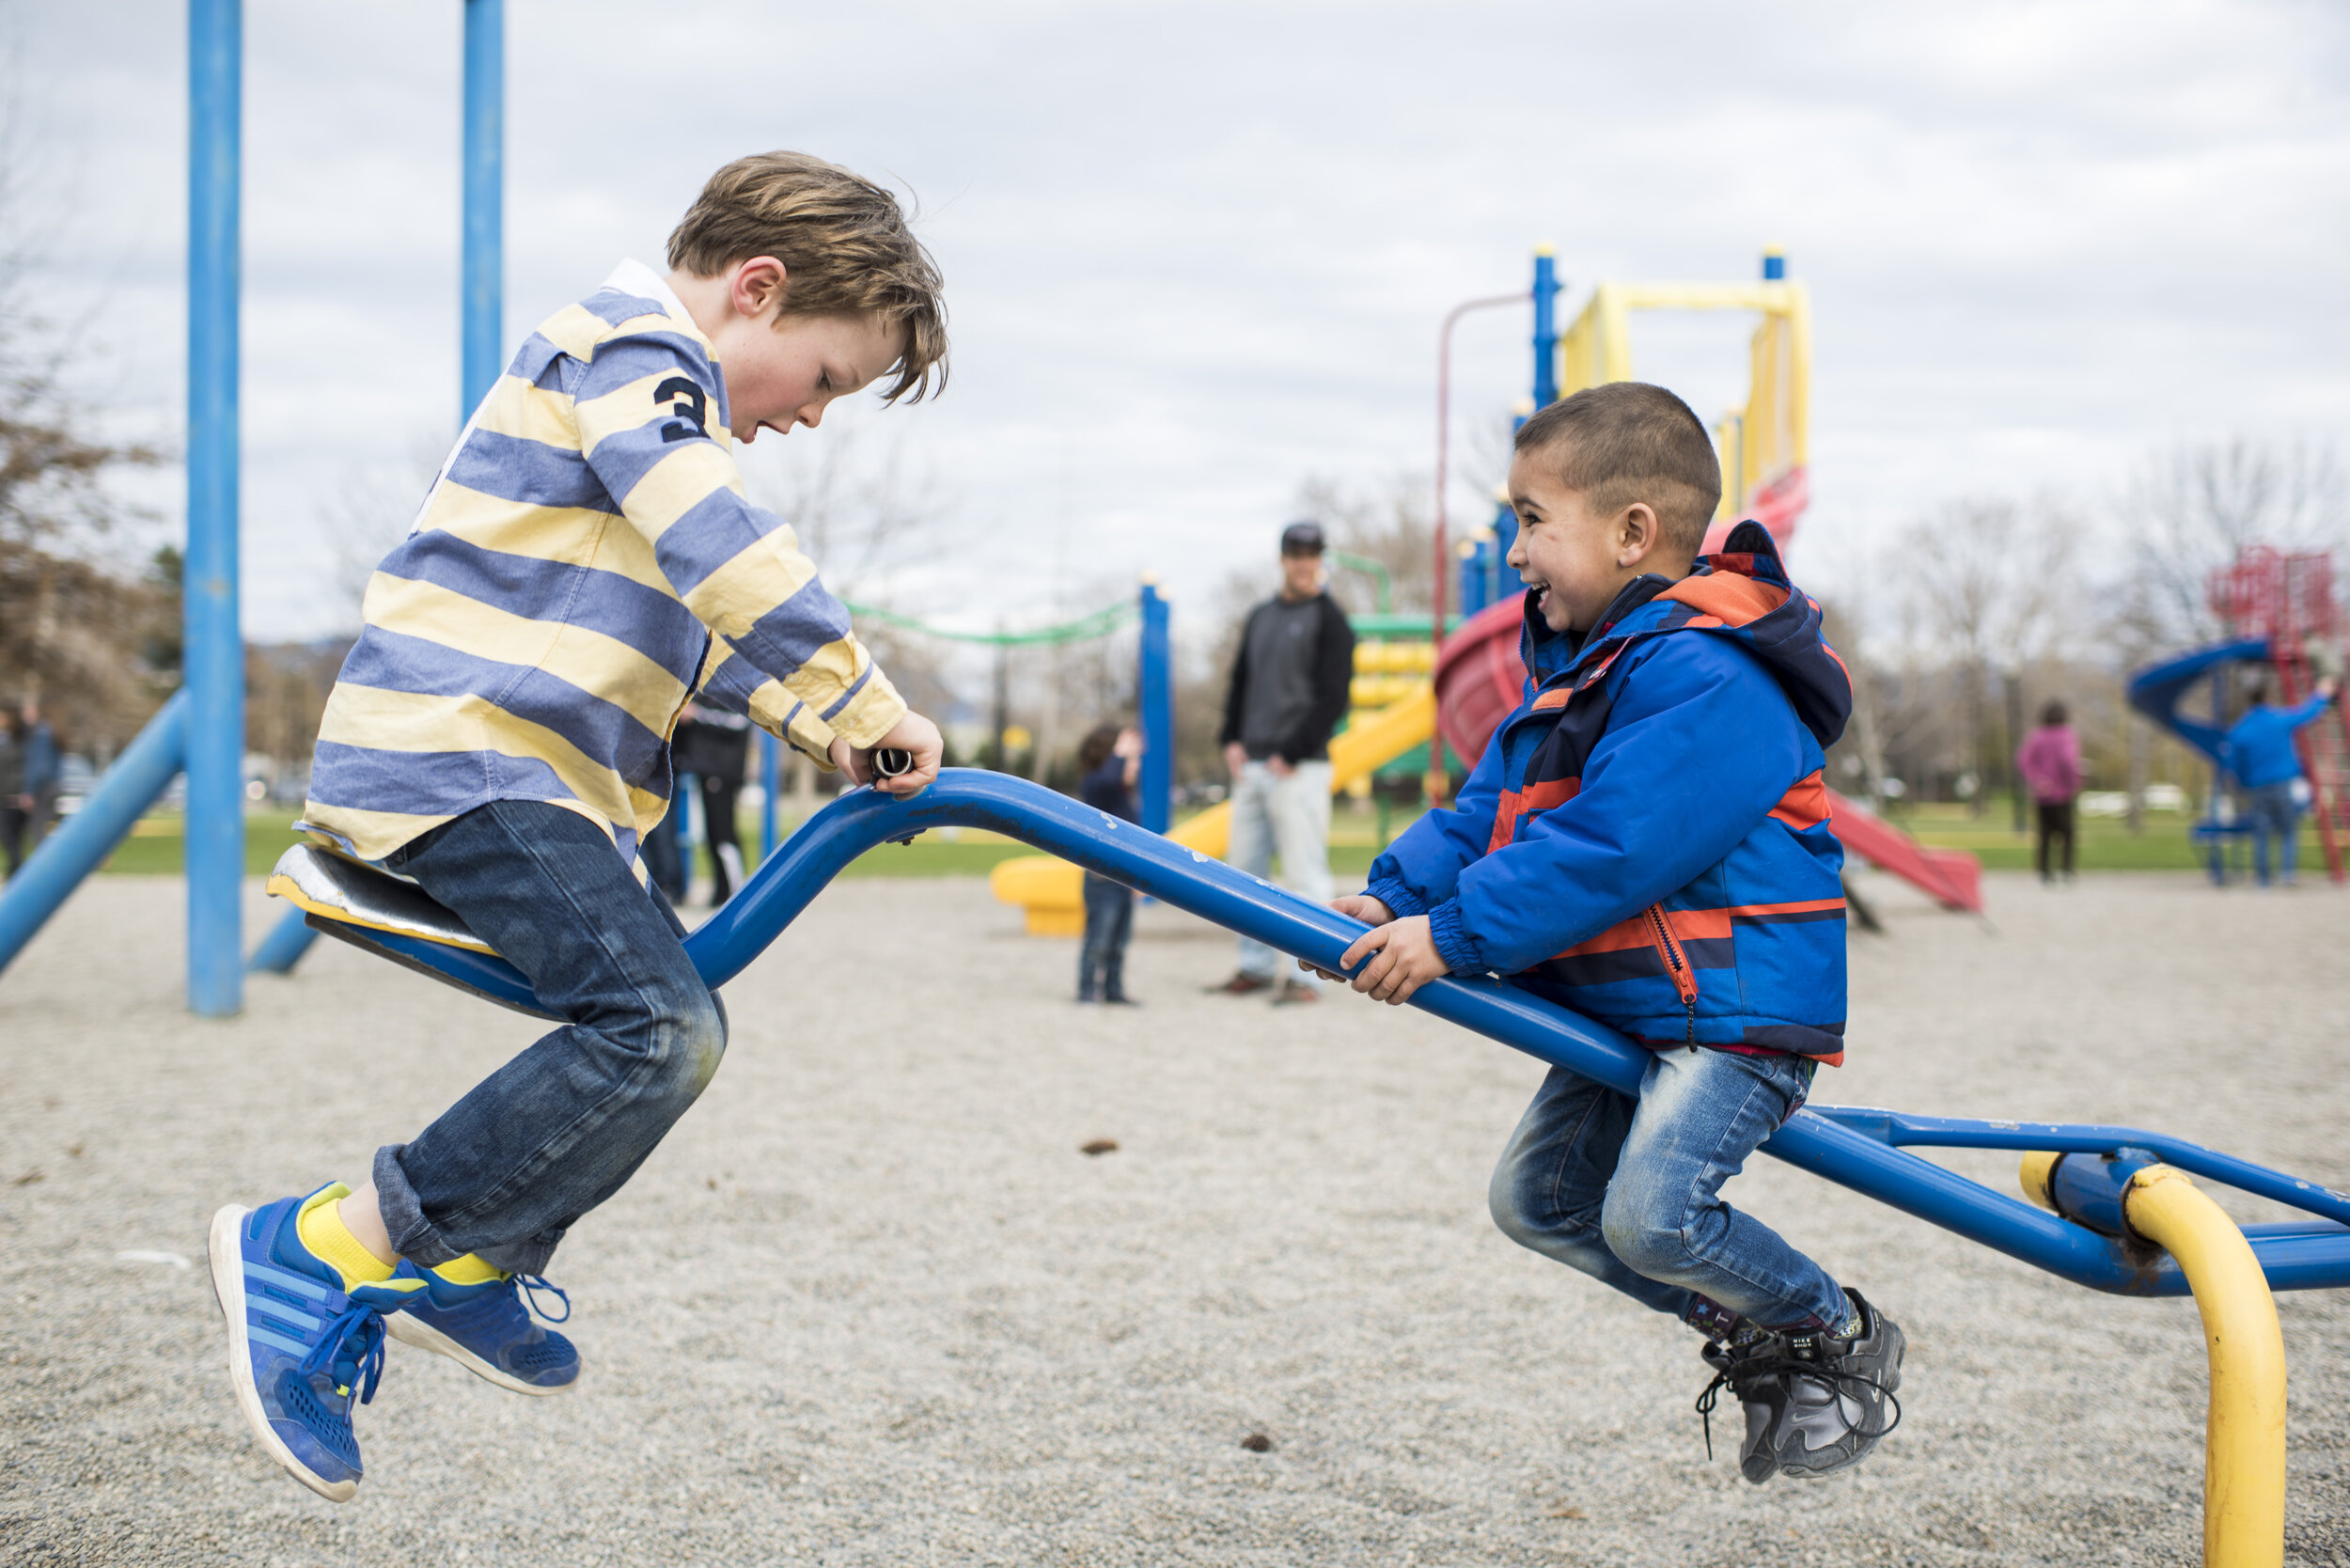 Syrian boy plays with a Canadian boy during an outing to a park, Kelowna, British Columbia, March 24, 2016. The Syrian family came to Canada through private sponsorship.